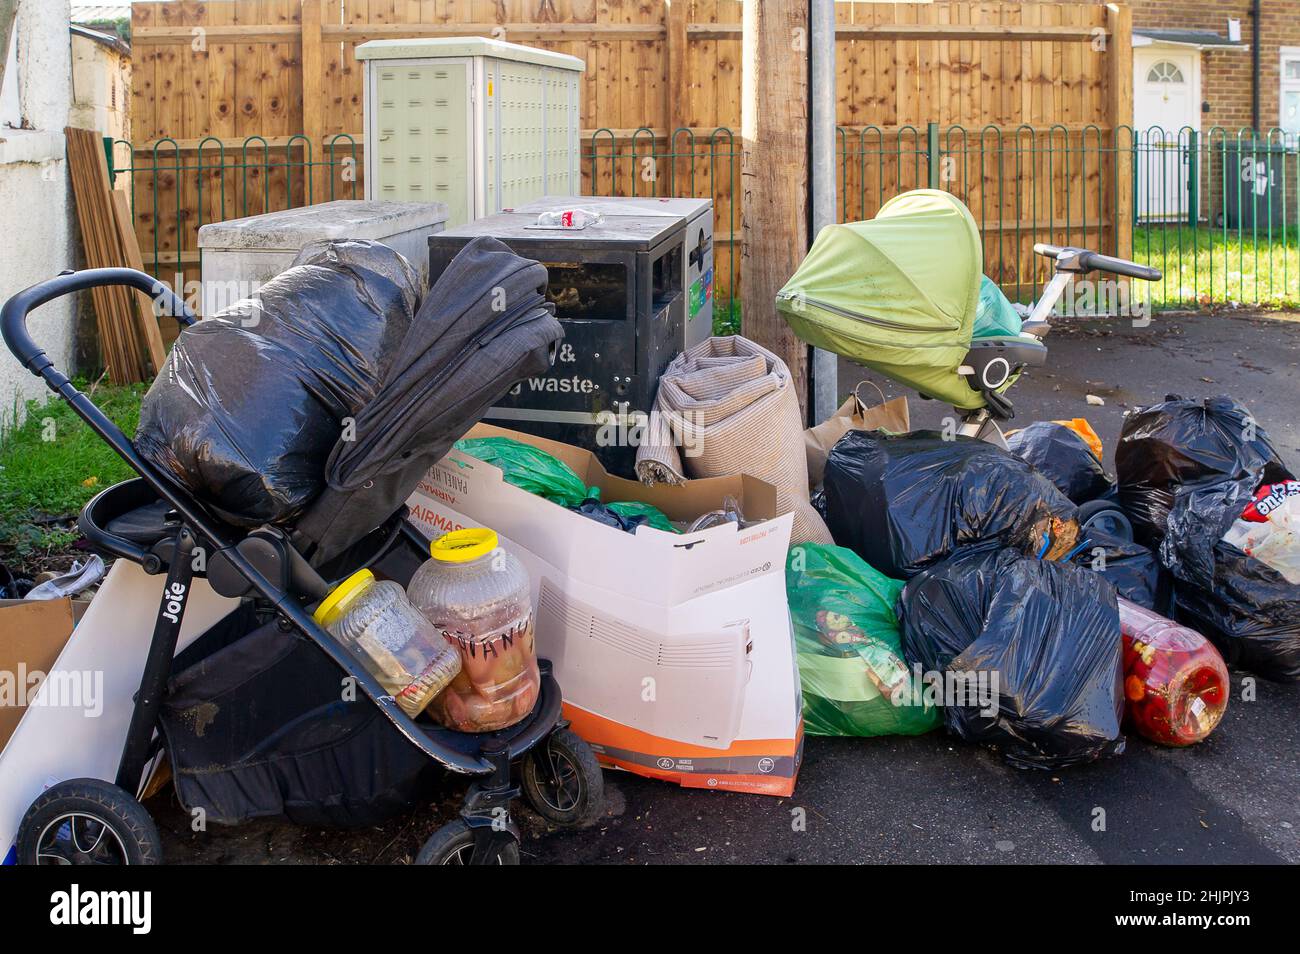 Slough, Berkshire, UK. 31st January, 2022. New figures from the Department for Environment, Food and Rural Affairs (Defra) state that there were 10,547 incidents of fly tipping in Berkshire between 2020 and 2021. Residents continue to fly tip rubbish in Chalvey, Slough despite the area being under surveillance and clear warning signs of fines of up £50,000 or 12 months imprisonment for those convicted of fly tipping. Ironcially Chalvey has a huge free public waste tip for household waste. Credit: Maureen McLean/Alamy Live News Stock Photo